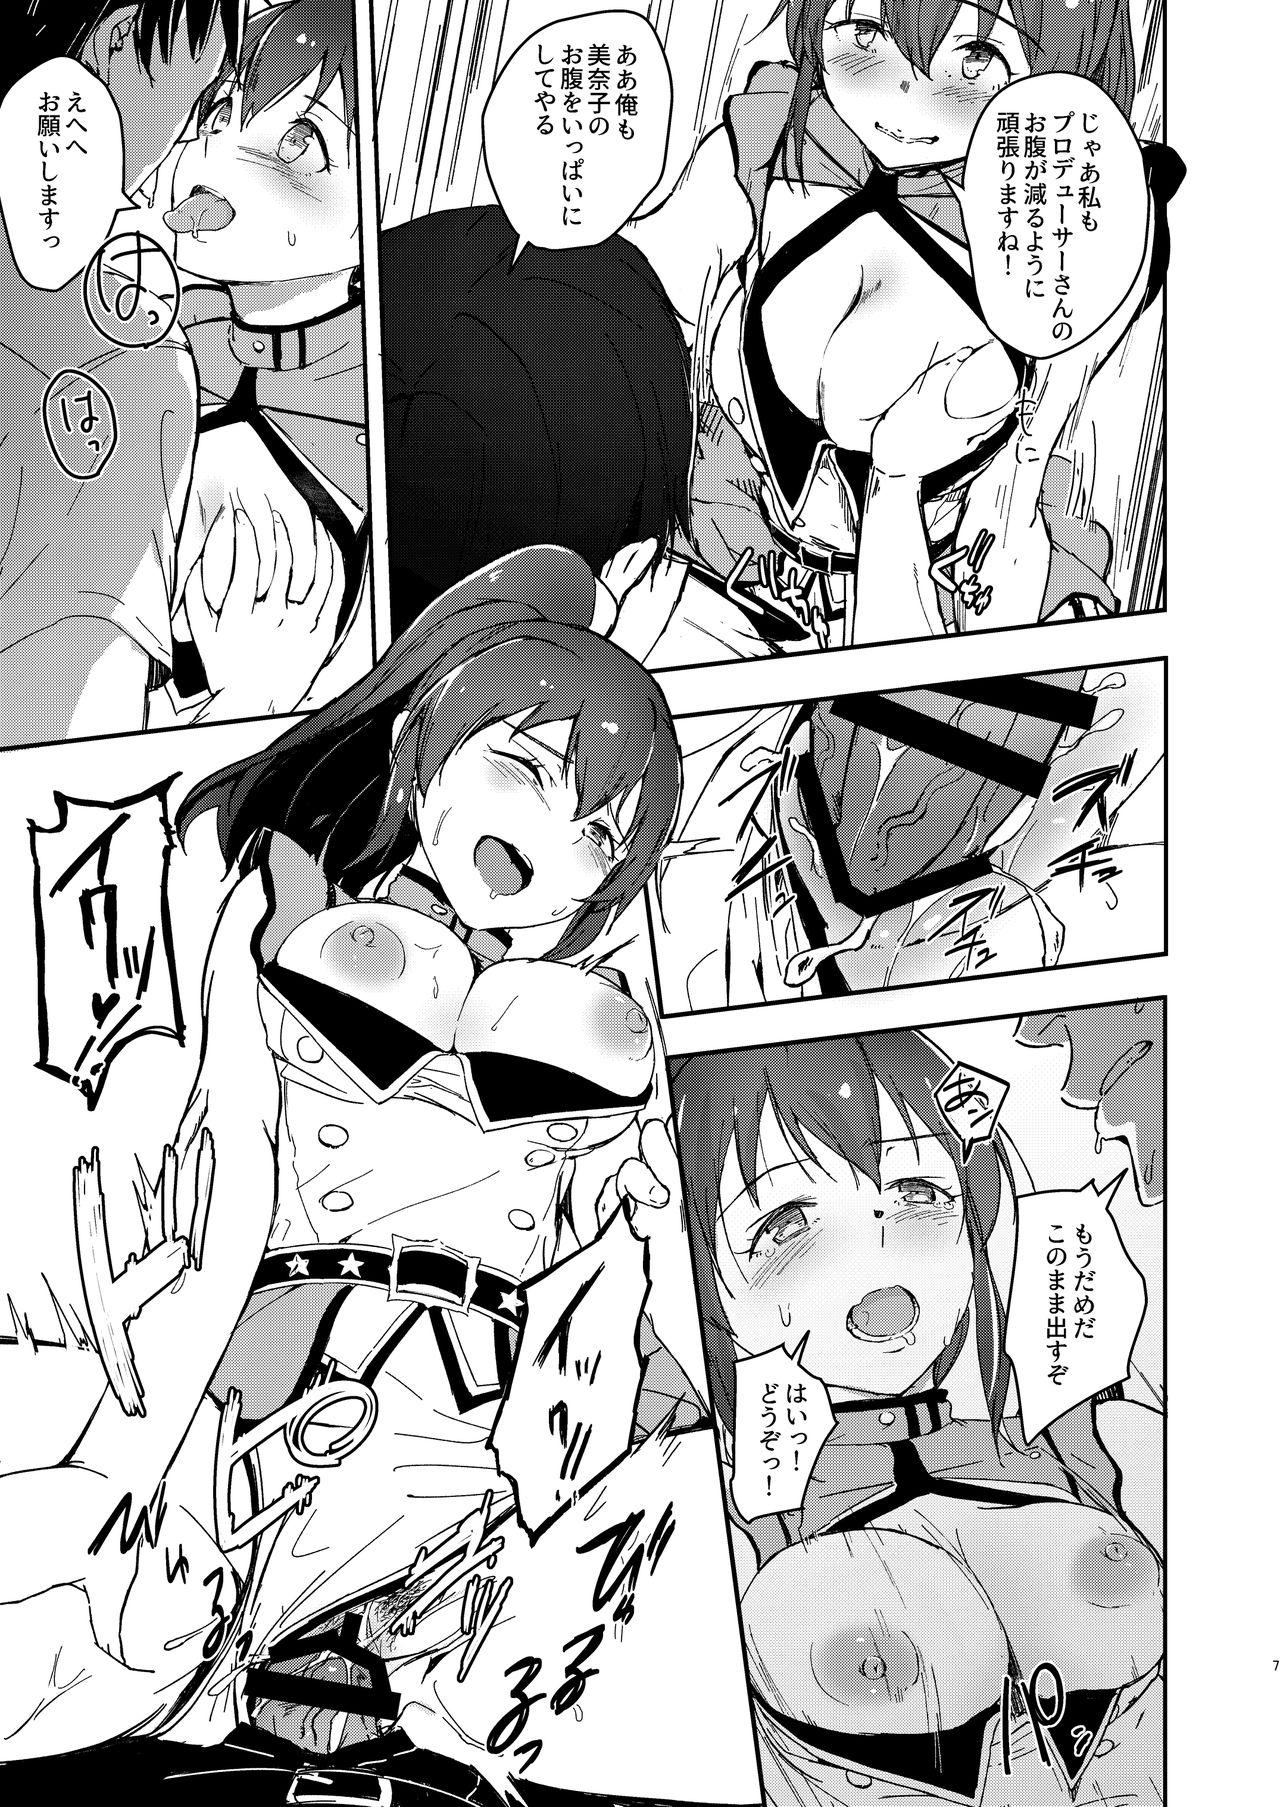 Sucks TOP! CLOVER BOOK + omake - The idolmaster Submissive - Page 6